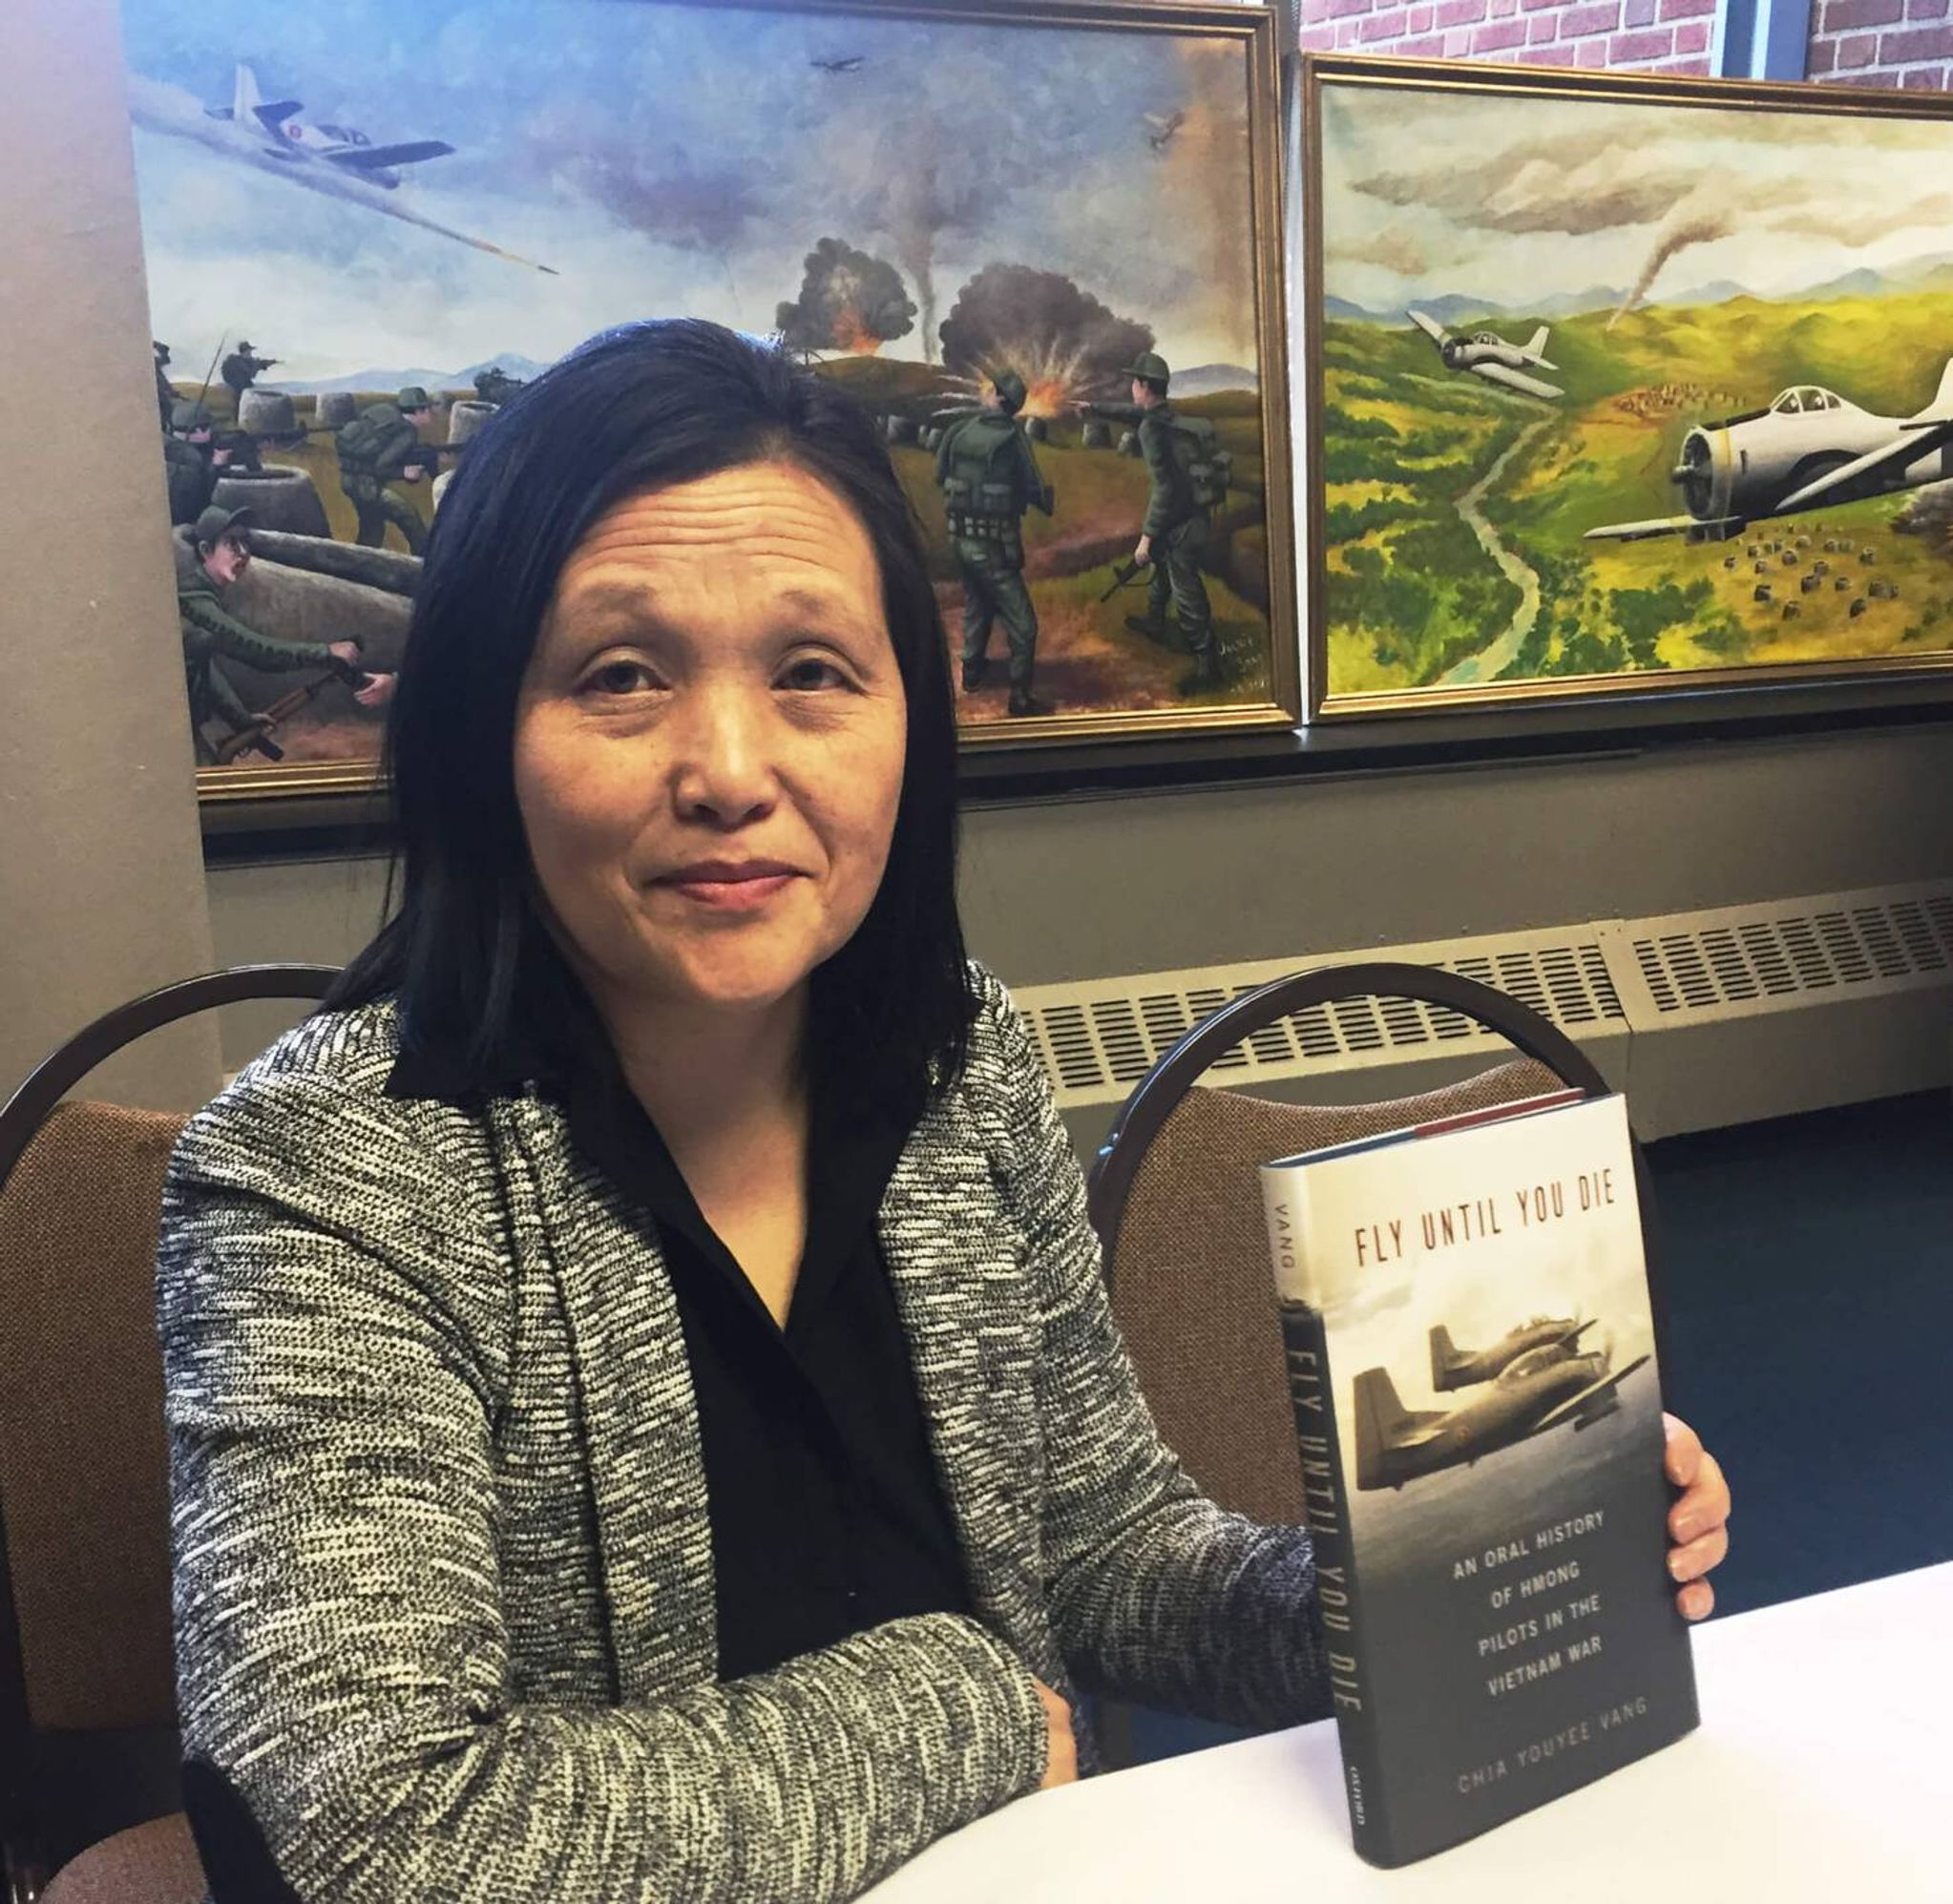 Hmong author holding a book titled "Fly Until You Die"